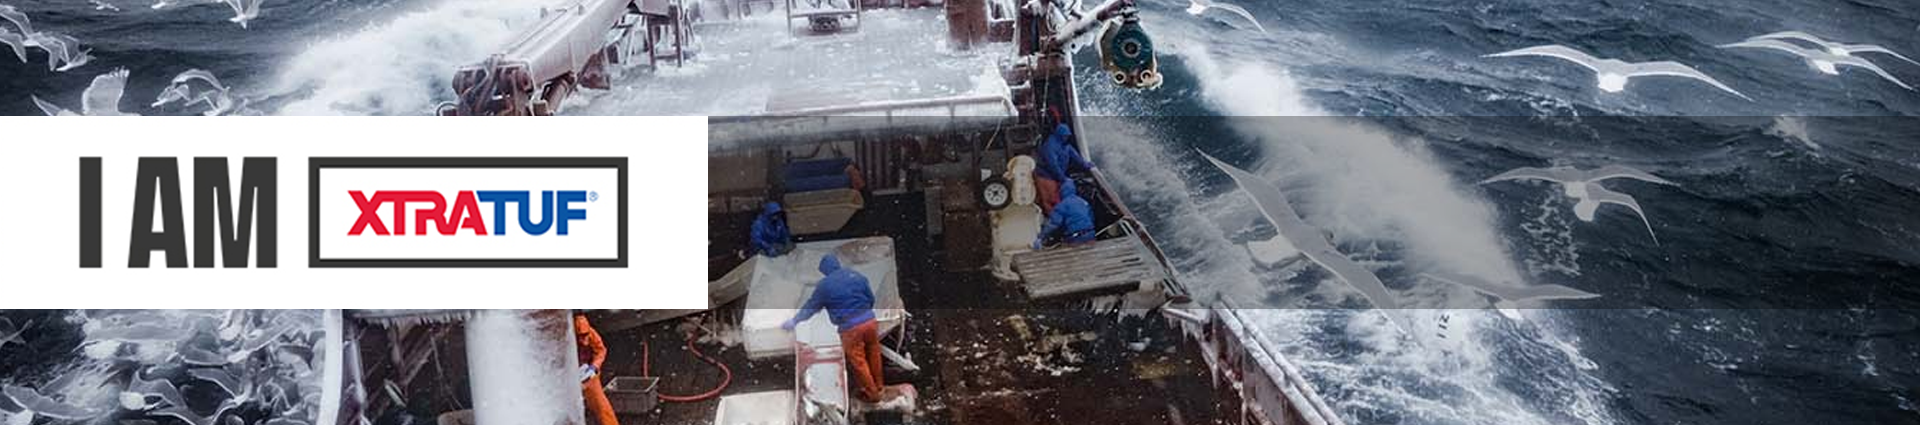 Commercial fishing crew working on violent waves